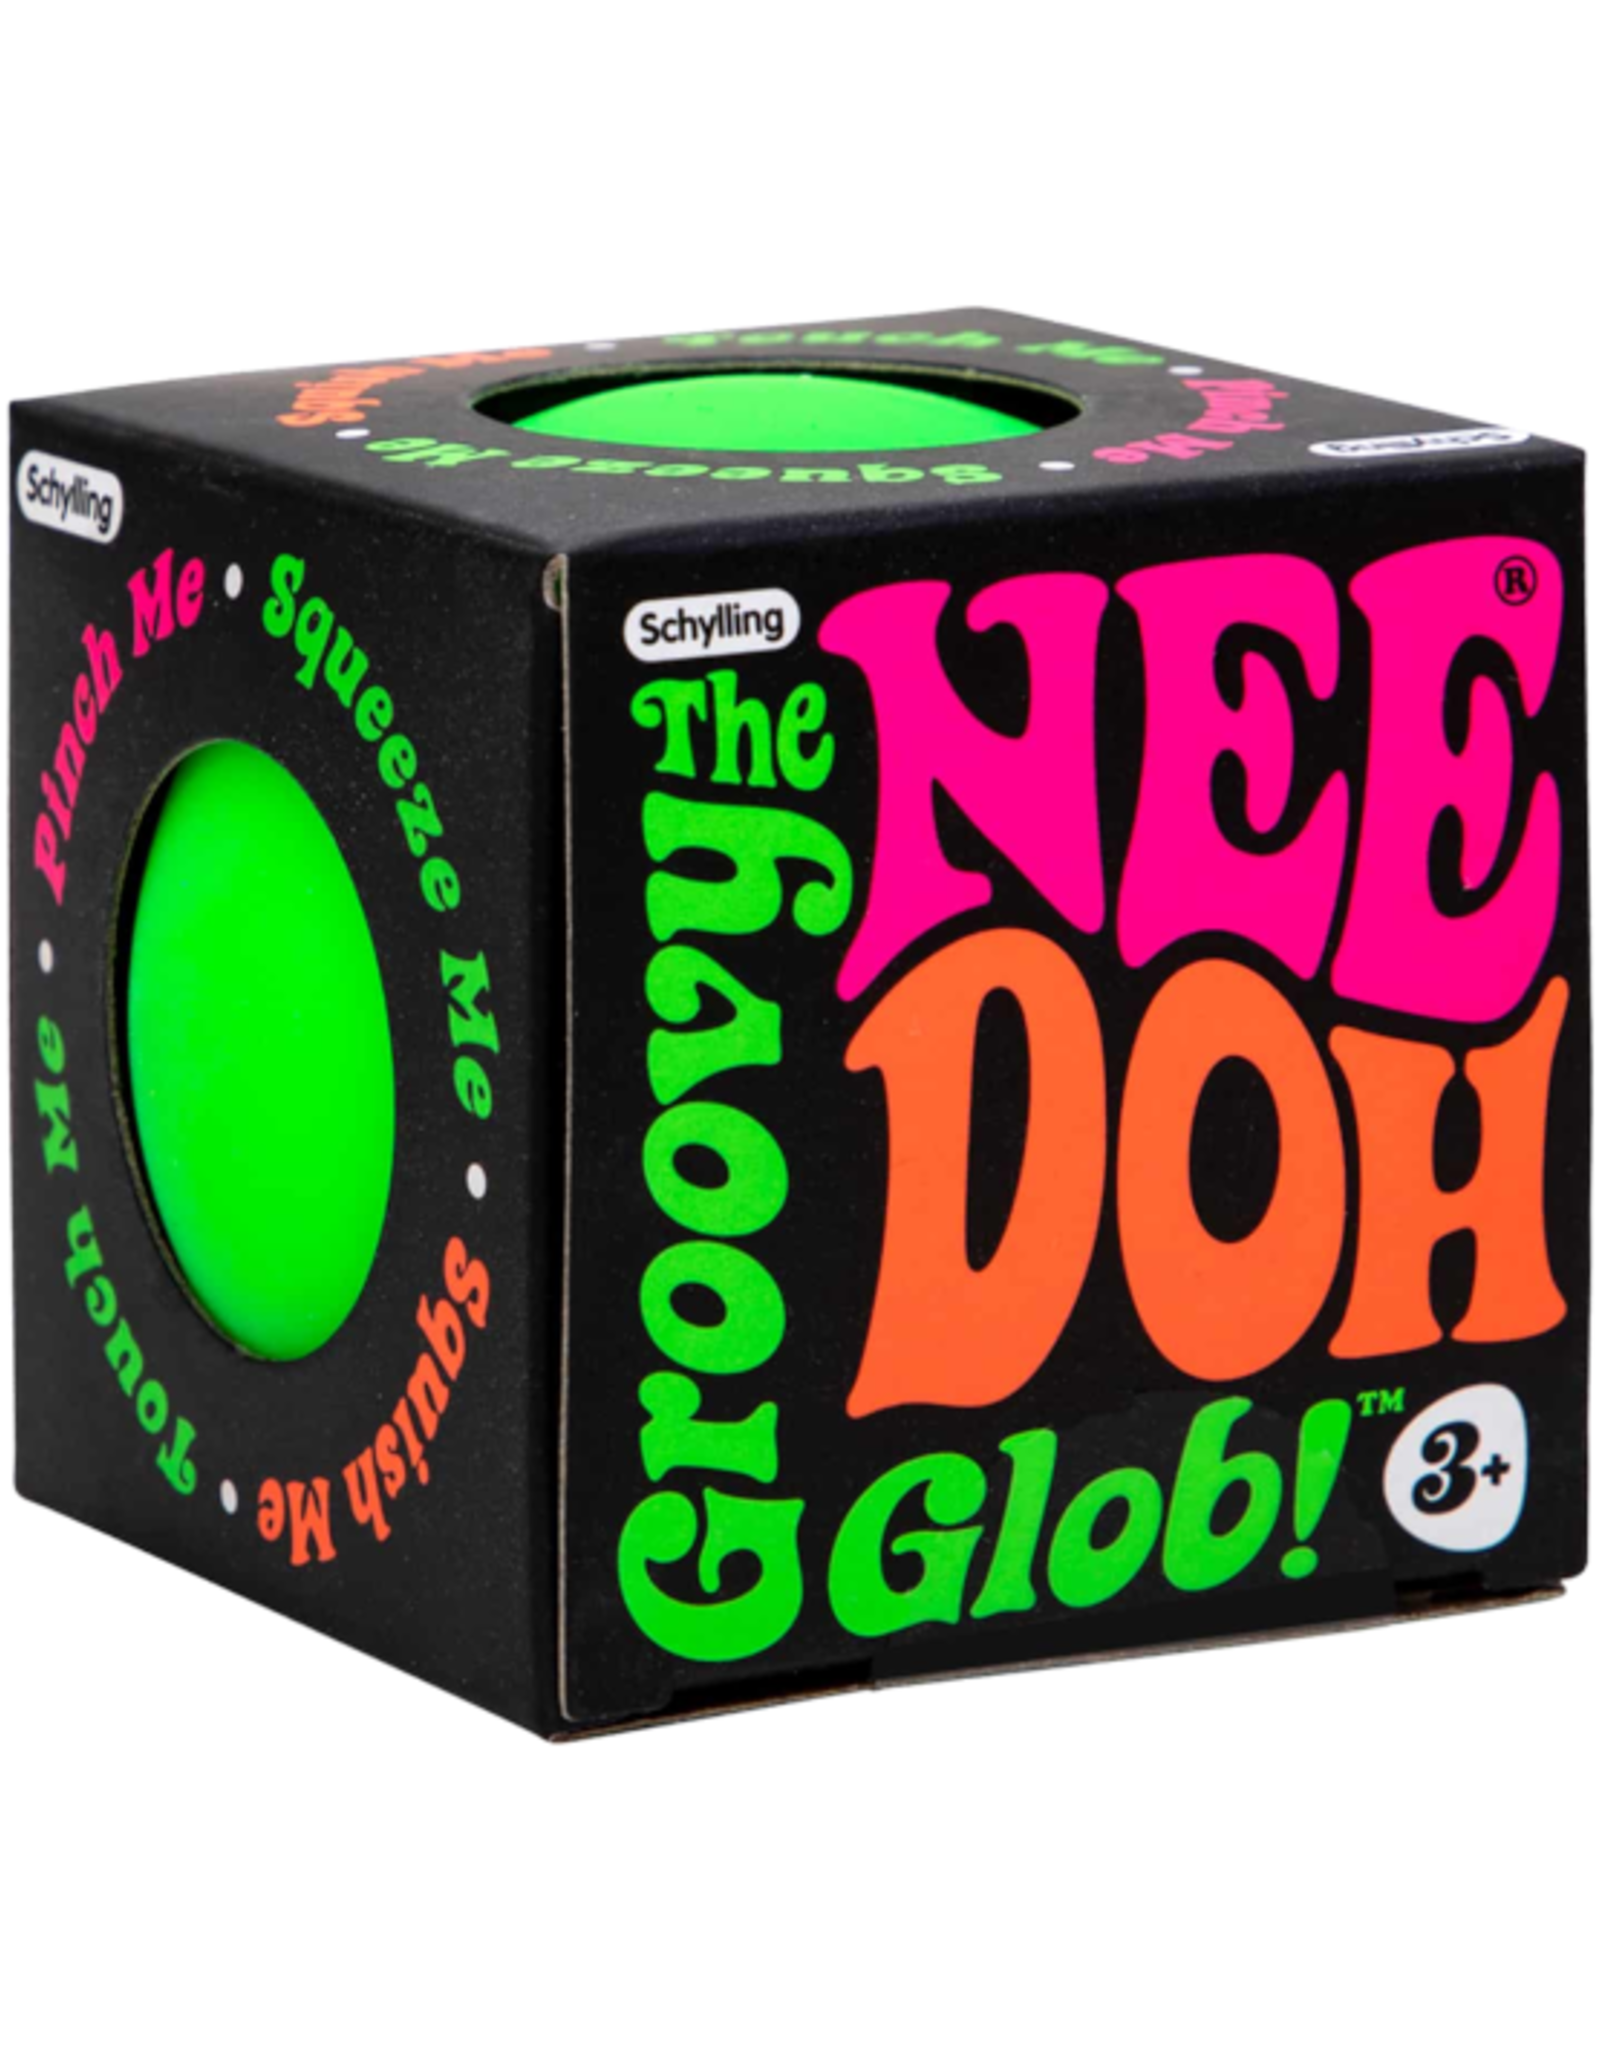 Schylling Nee Doh - The Groovy Glob